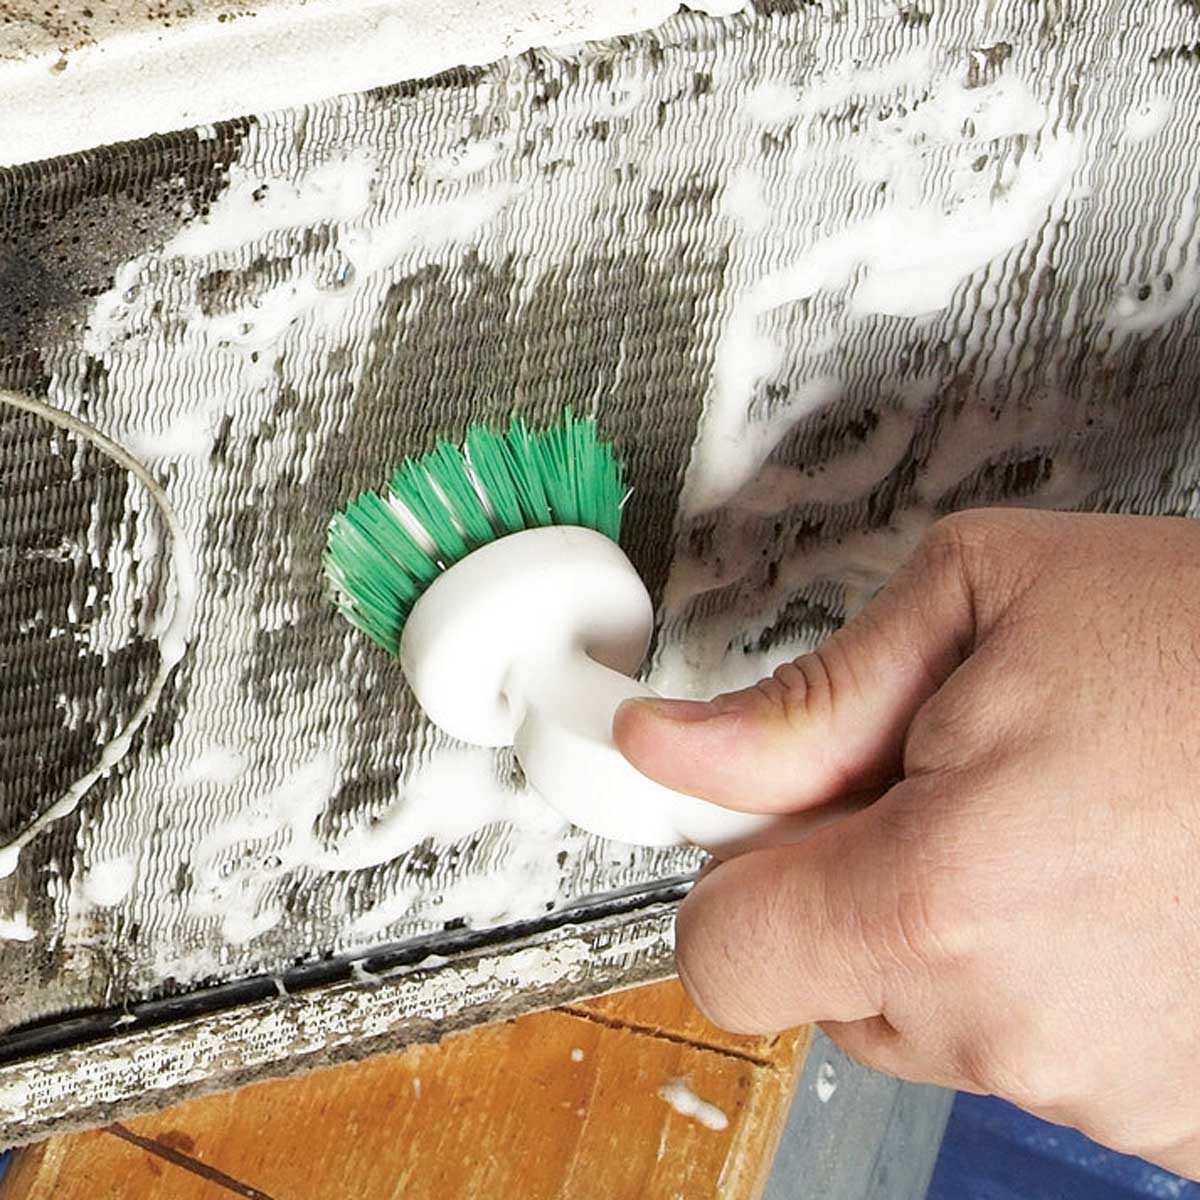 Cleaning AC Coils The Proper Way (Updated 2019) - All Time Air Conditioning